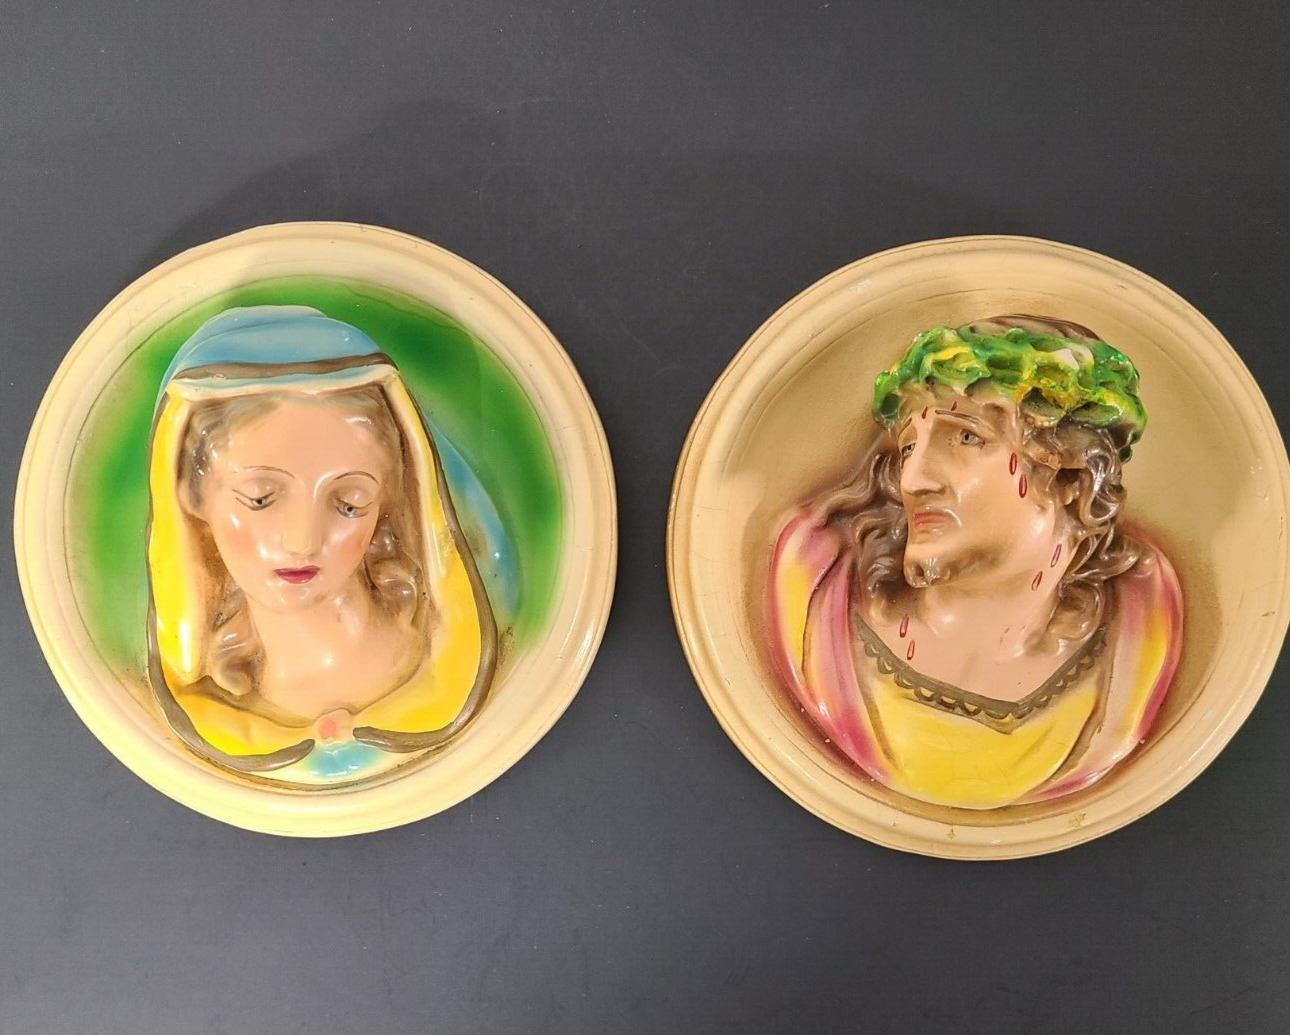 2 Vtg Chalkware Plaster Religious Wall Plaques Virgin Mary Jesus Round Paint 3D